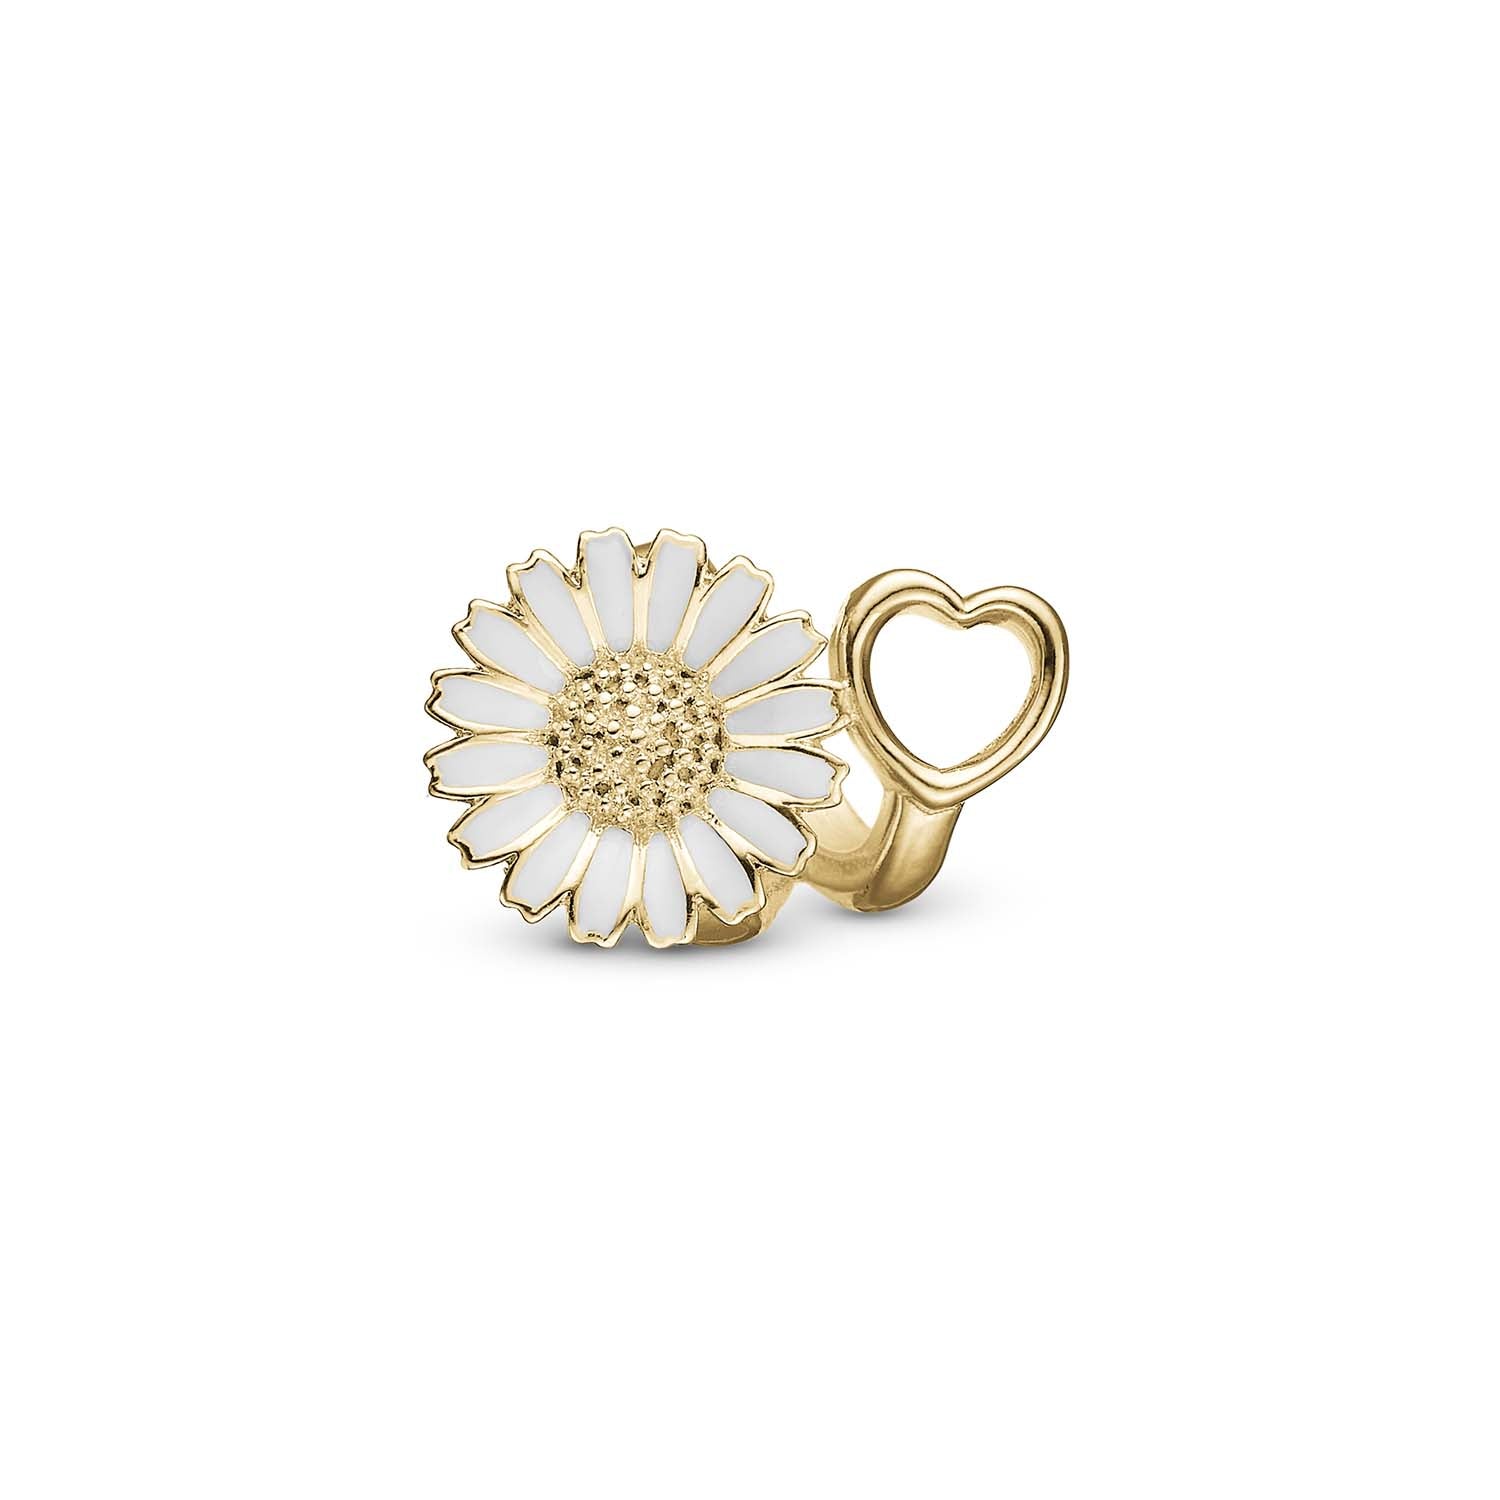 Christina Design London Jewelry & Watches - Marguerit ring Bliss charm, 4 mm Forgyldt sterlingsølv